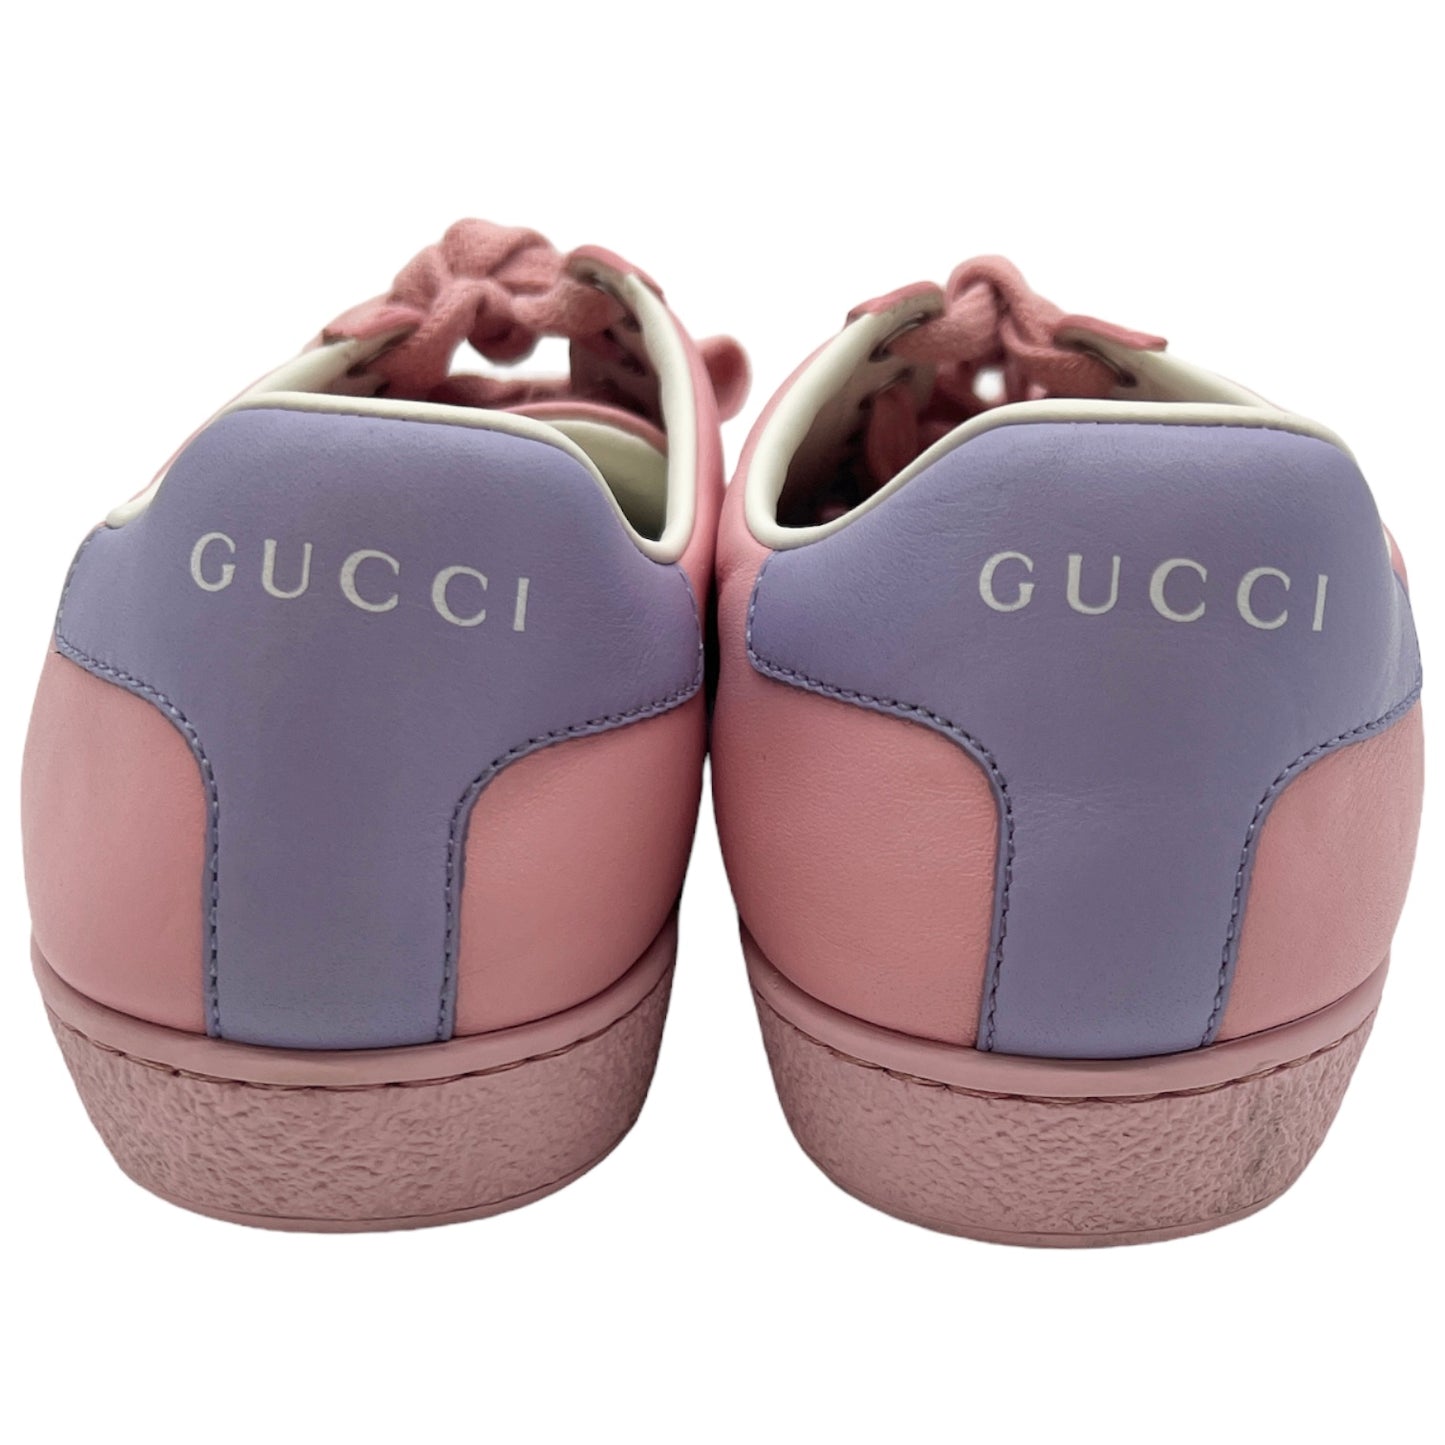 Shoes Designer By Gucci  Size: 5